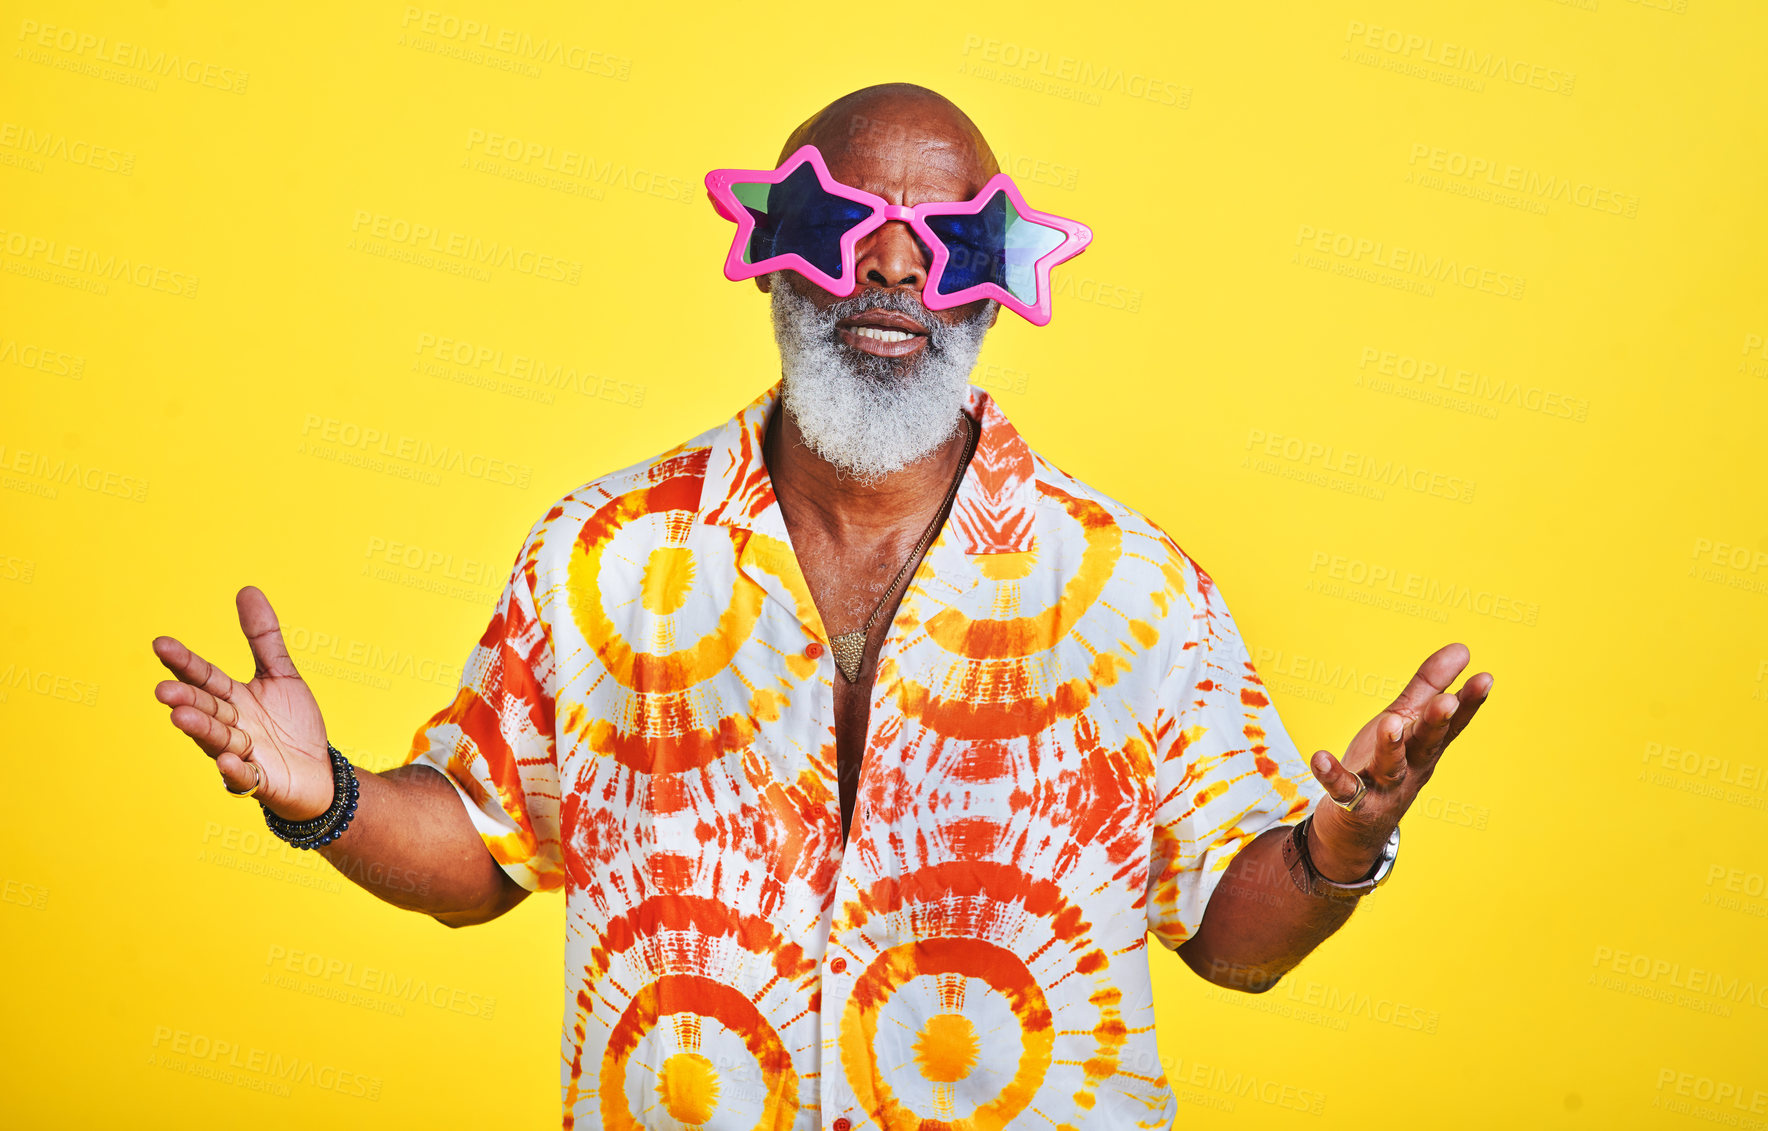 Buy stock photo Portrait of a funky and stylish senior man wearing sunglasses posing in studio against a yellow background